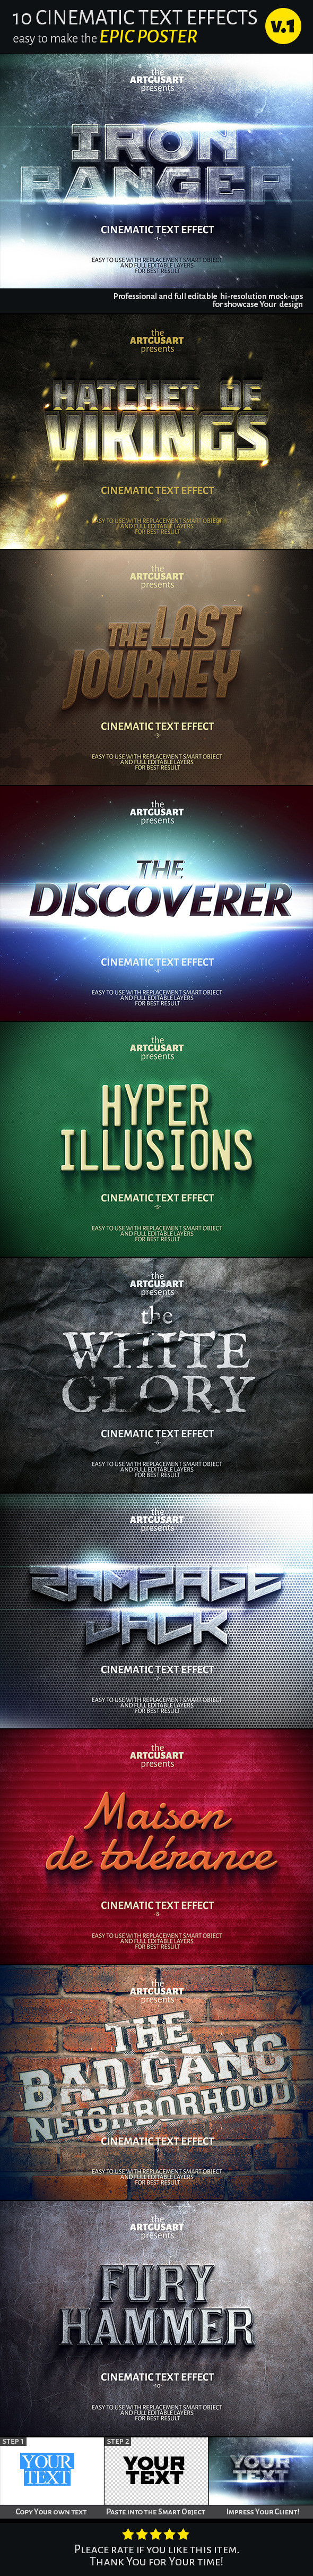 Cinematic text effect v 1 main